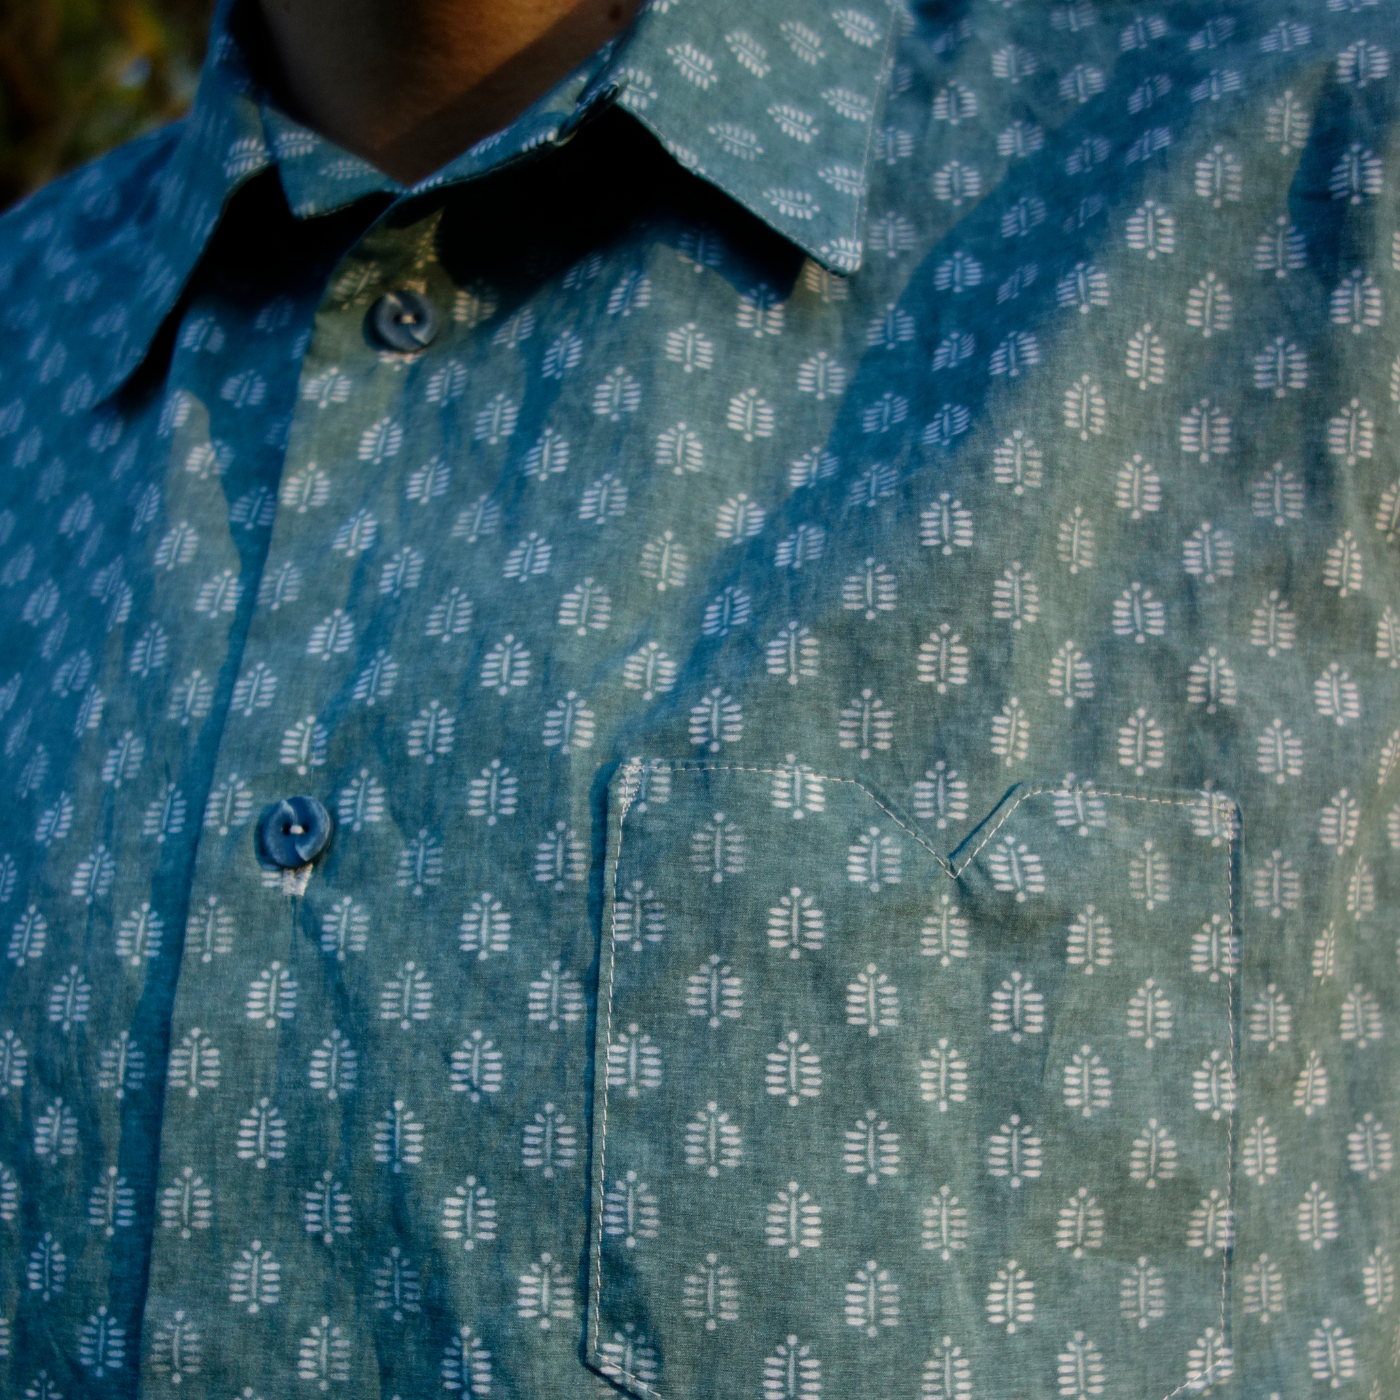 A close up of the neck and pocket at the top of a button-up shirt. The shirt has repeating rows of small white block print ferns.